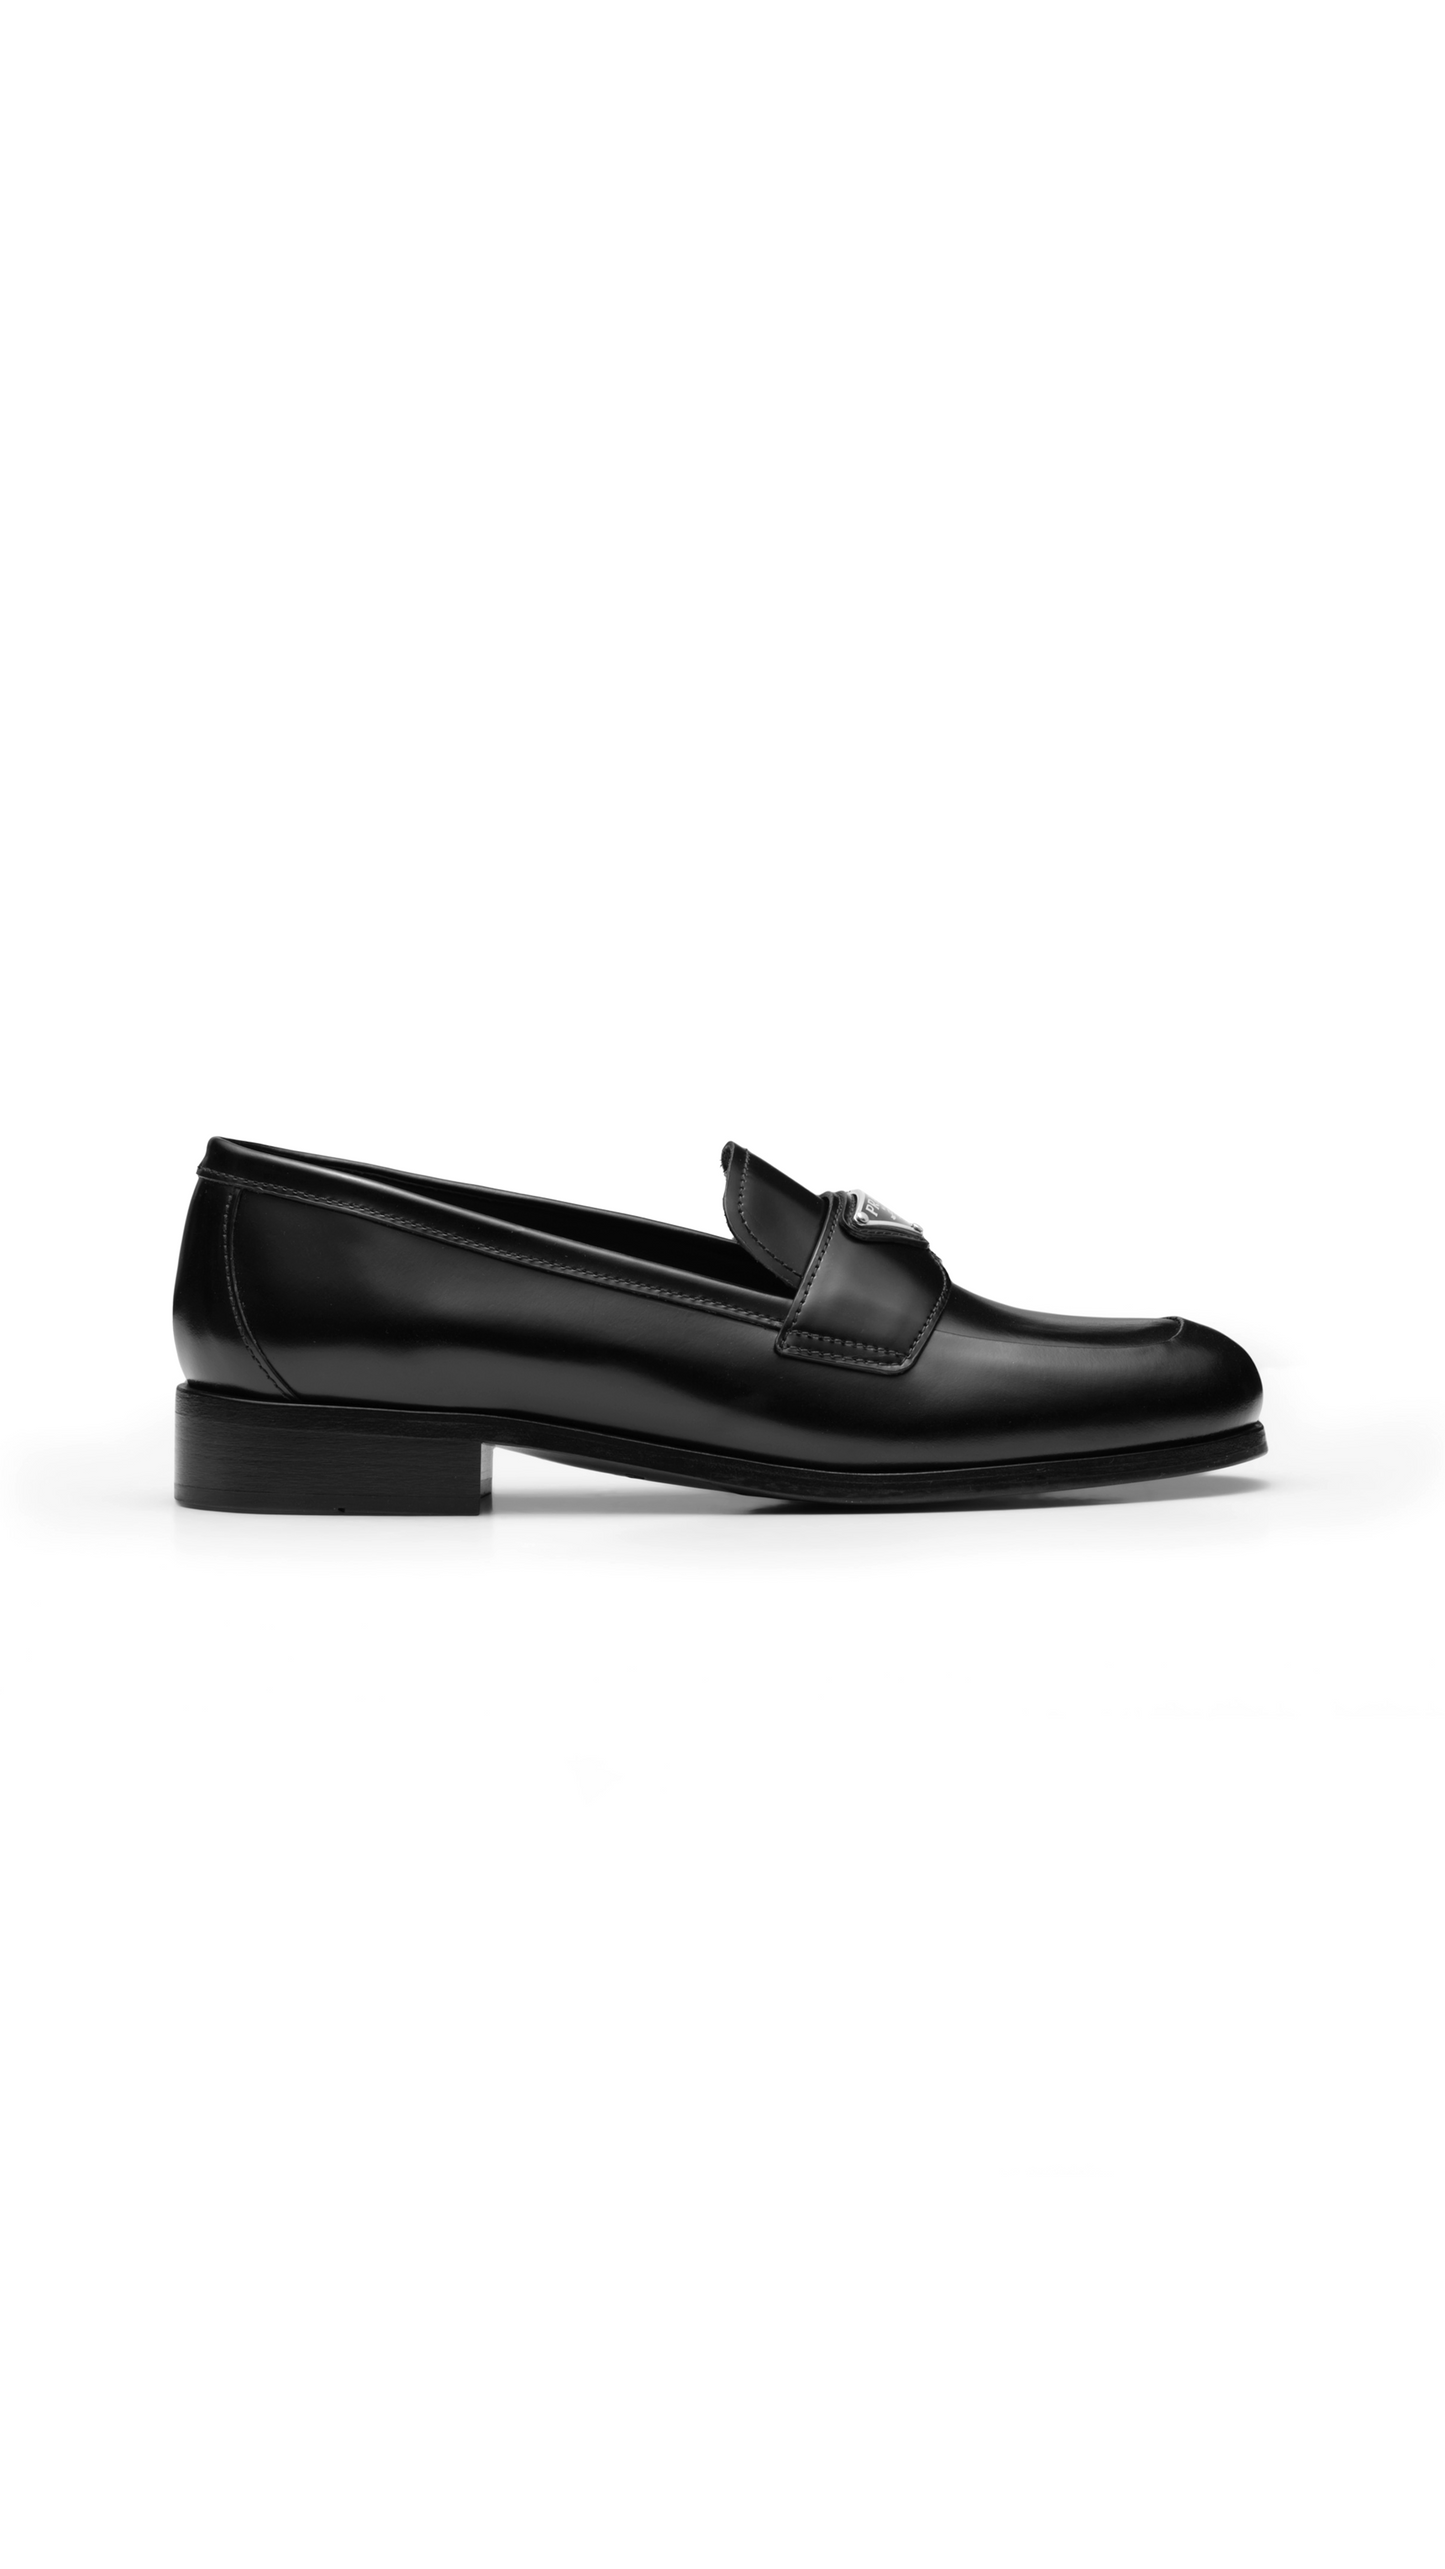 Brushed Leather Loafers - Black.